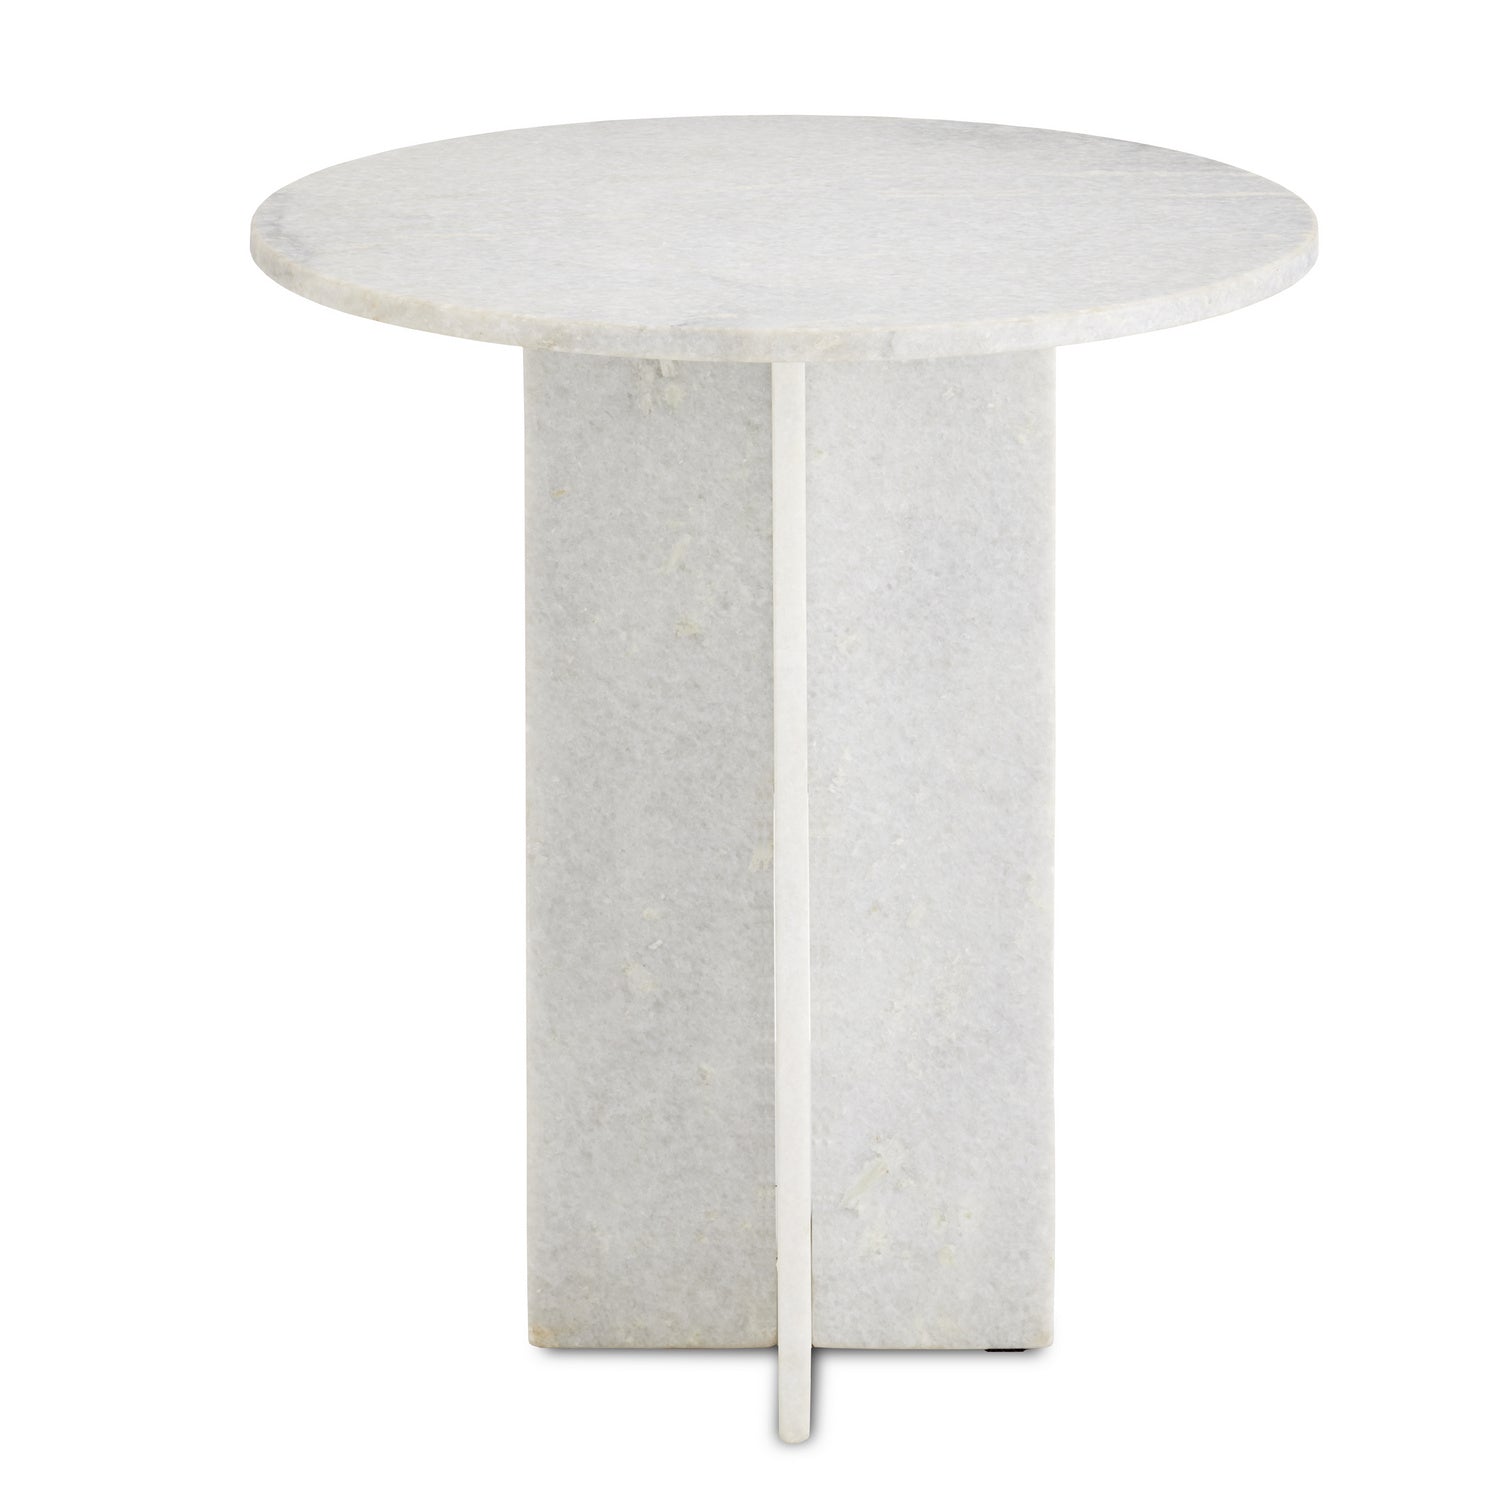 Accent Table from the Harmon collection in White finish